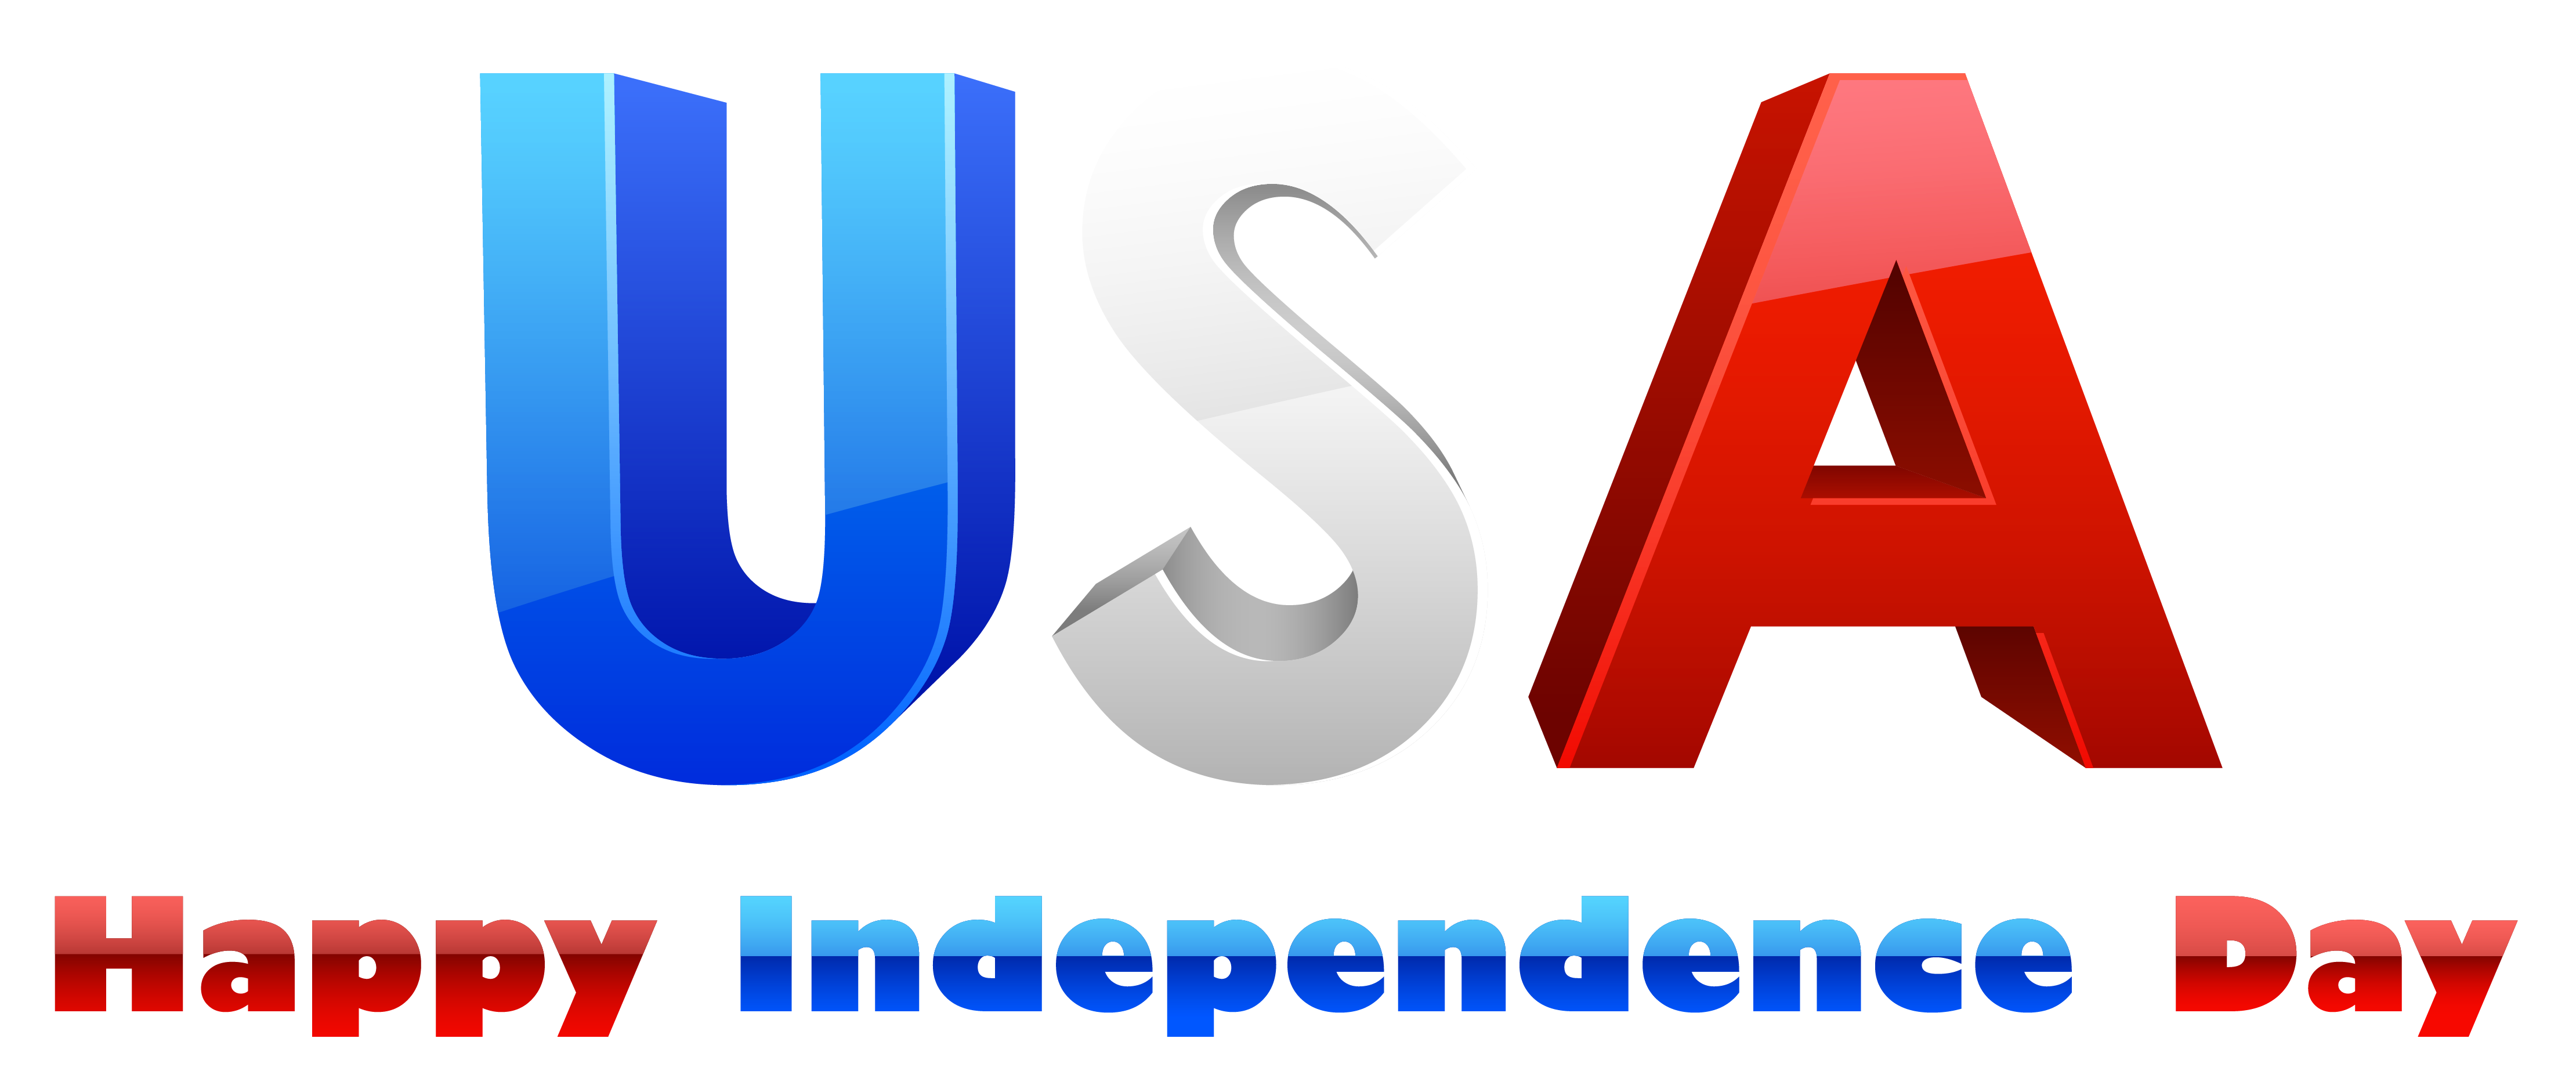 free clipart images independence day - photo #25